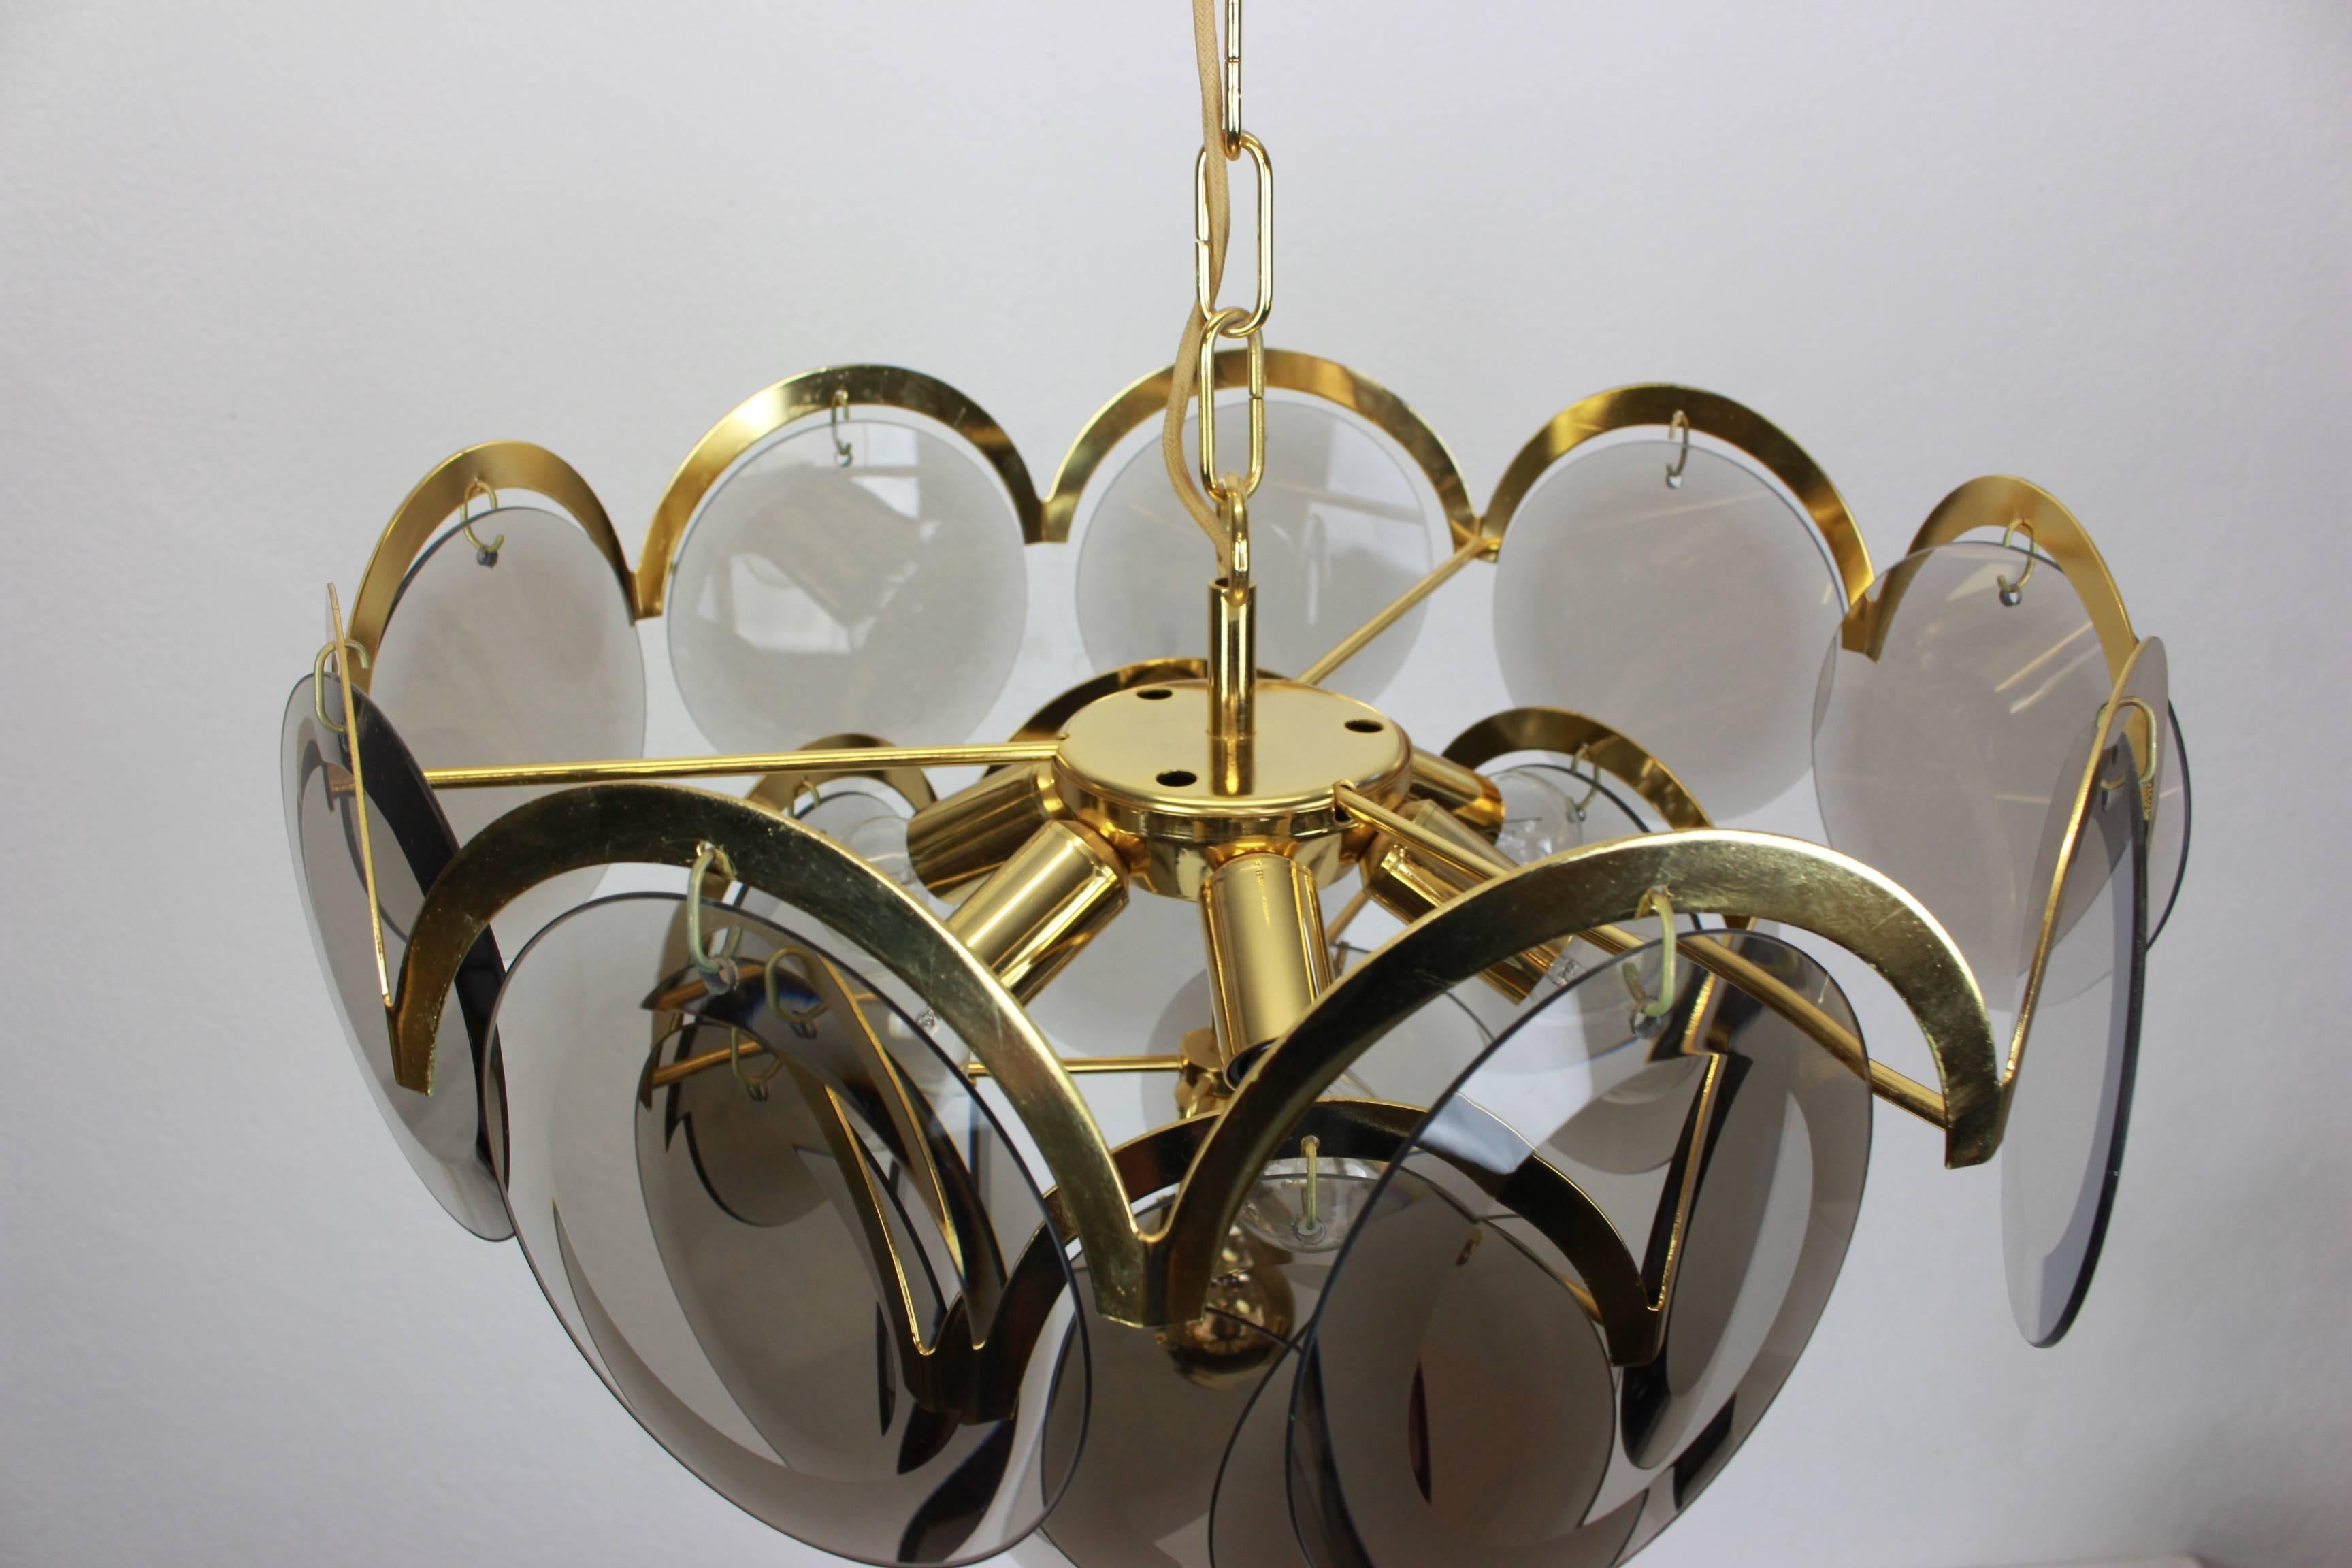 A stunning four-tier chandelier by Vistosi, Italy, manufactured in, circa 1960-1969
High quality and in very good condition. Cleaned, well-wired and ready to use. 
The fixture requires 7 x E14 standard bulbs with 40W max each 
Light bulbs are not